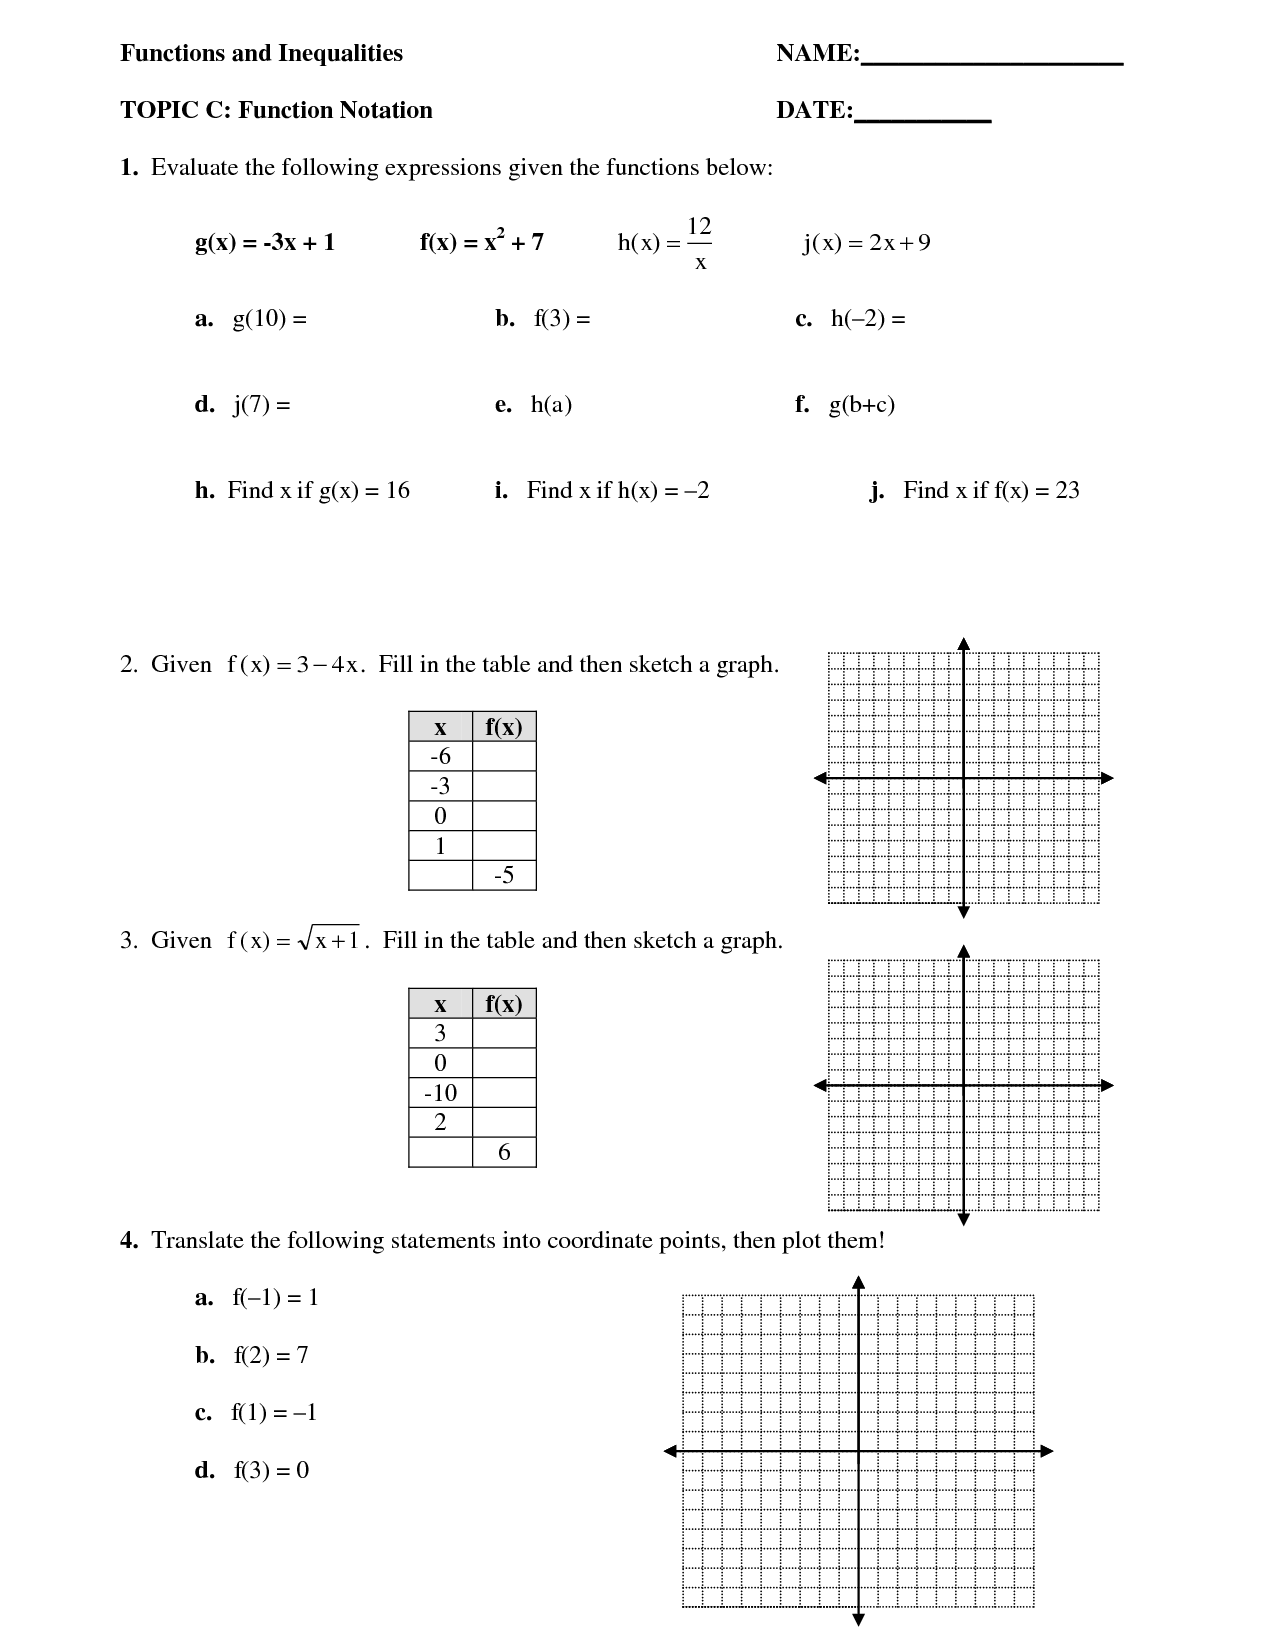 Function Notation Worksheet With Answers Pdf